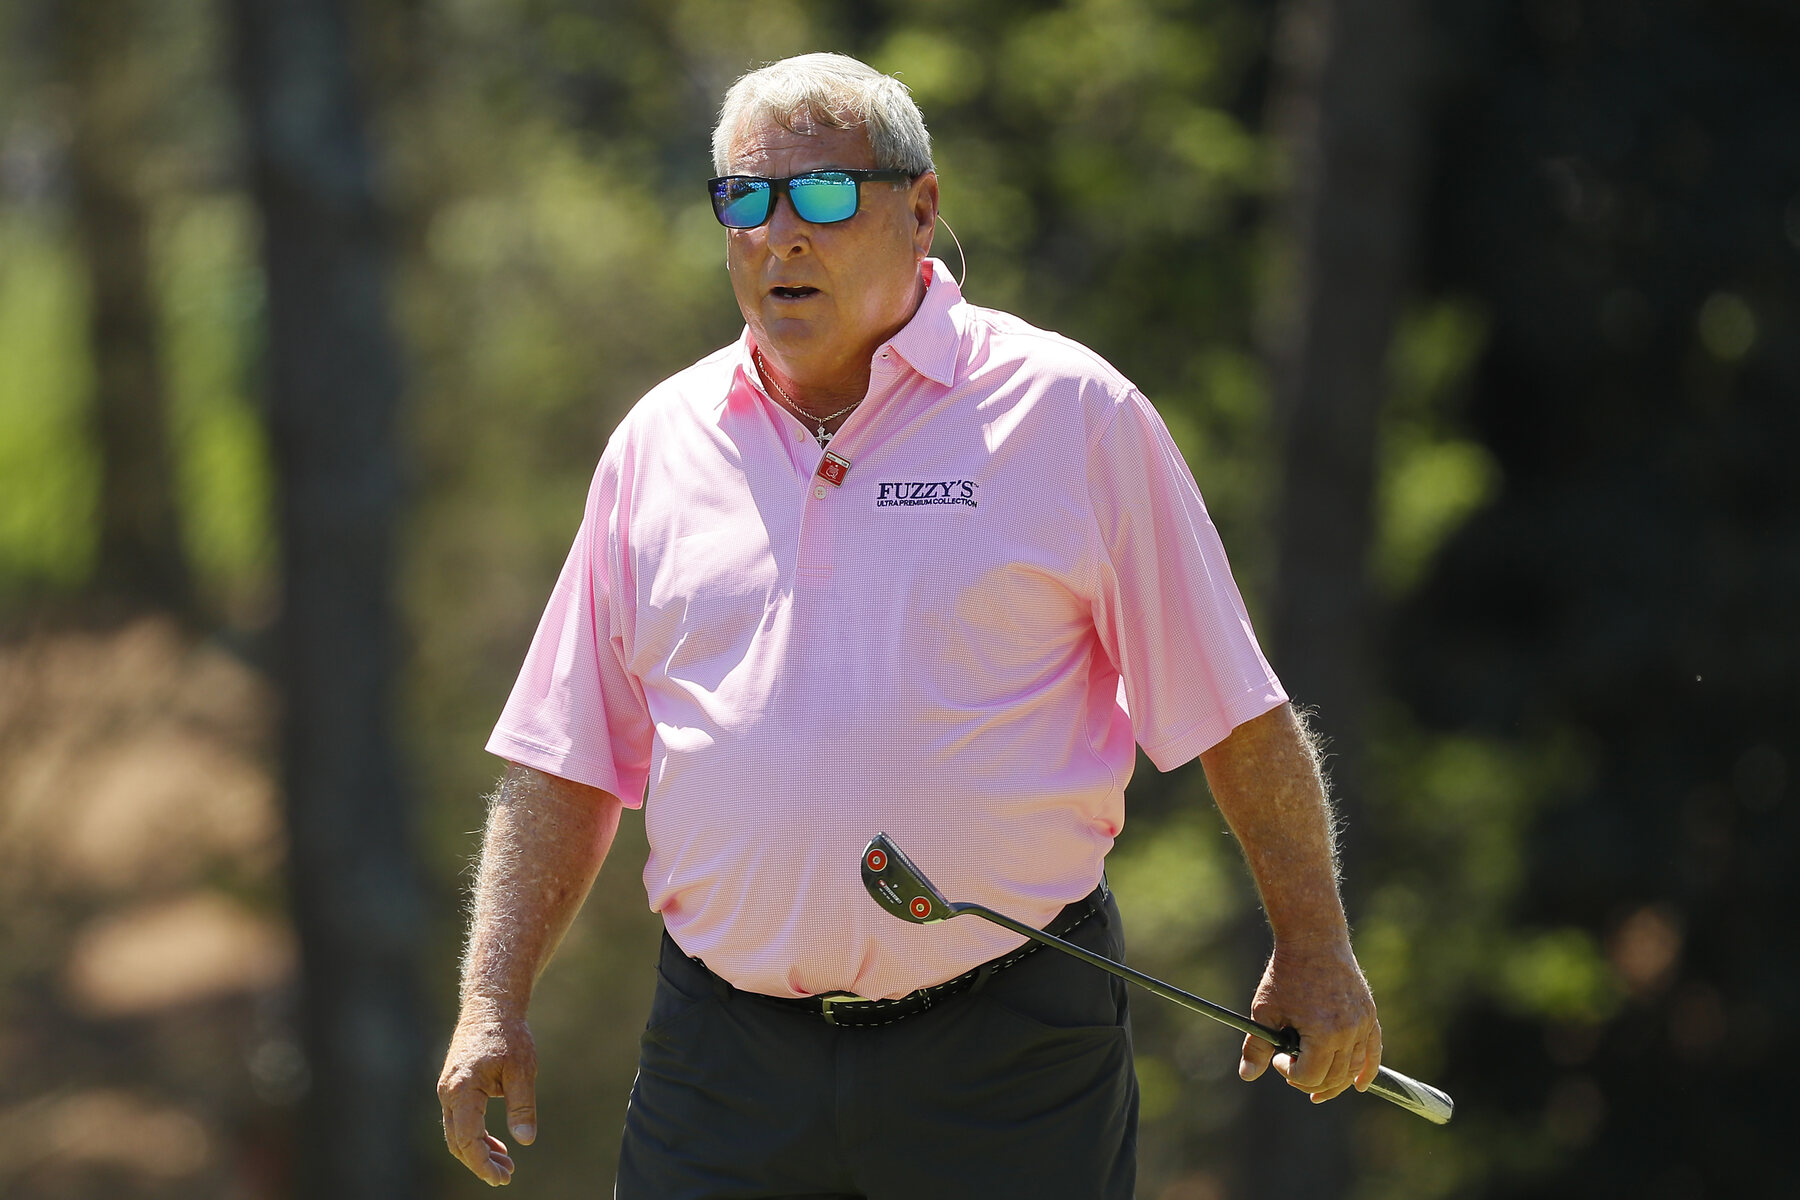 13-astonishing-facts-about-fuzzy-zoeller